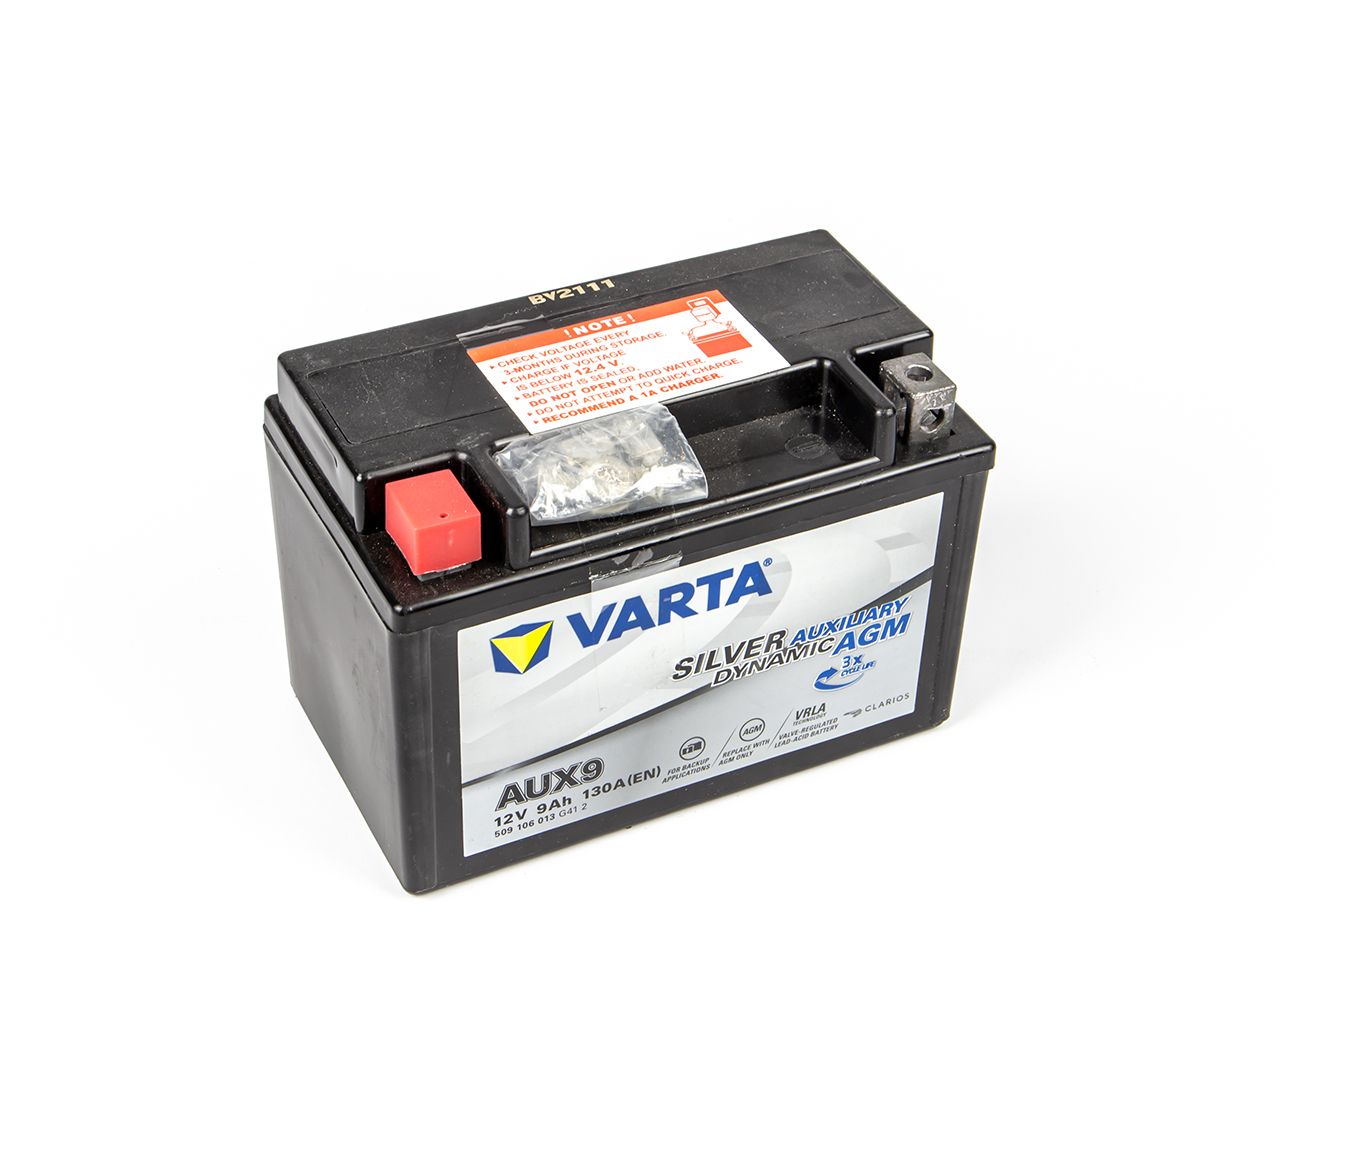 AUX9 VARTA back-up accu / Silver AGM Auxiliary (509106013)